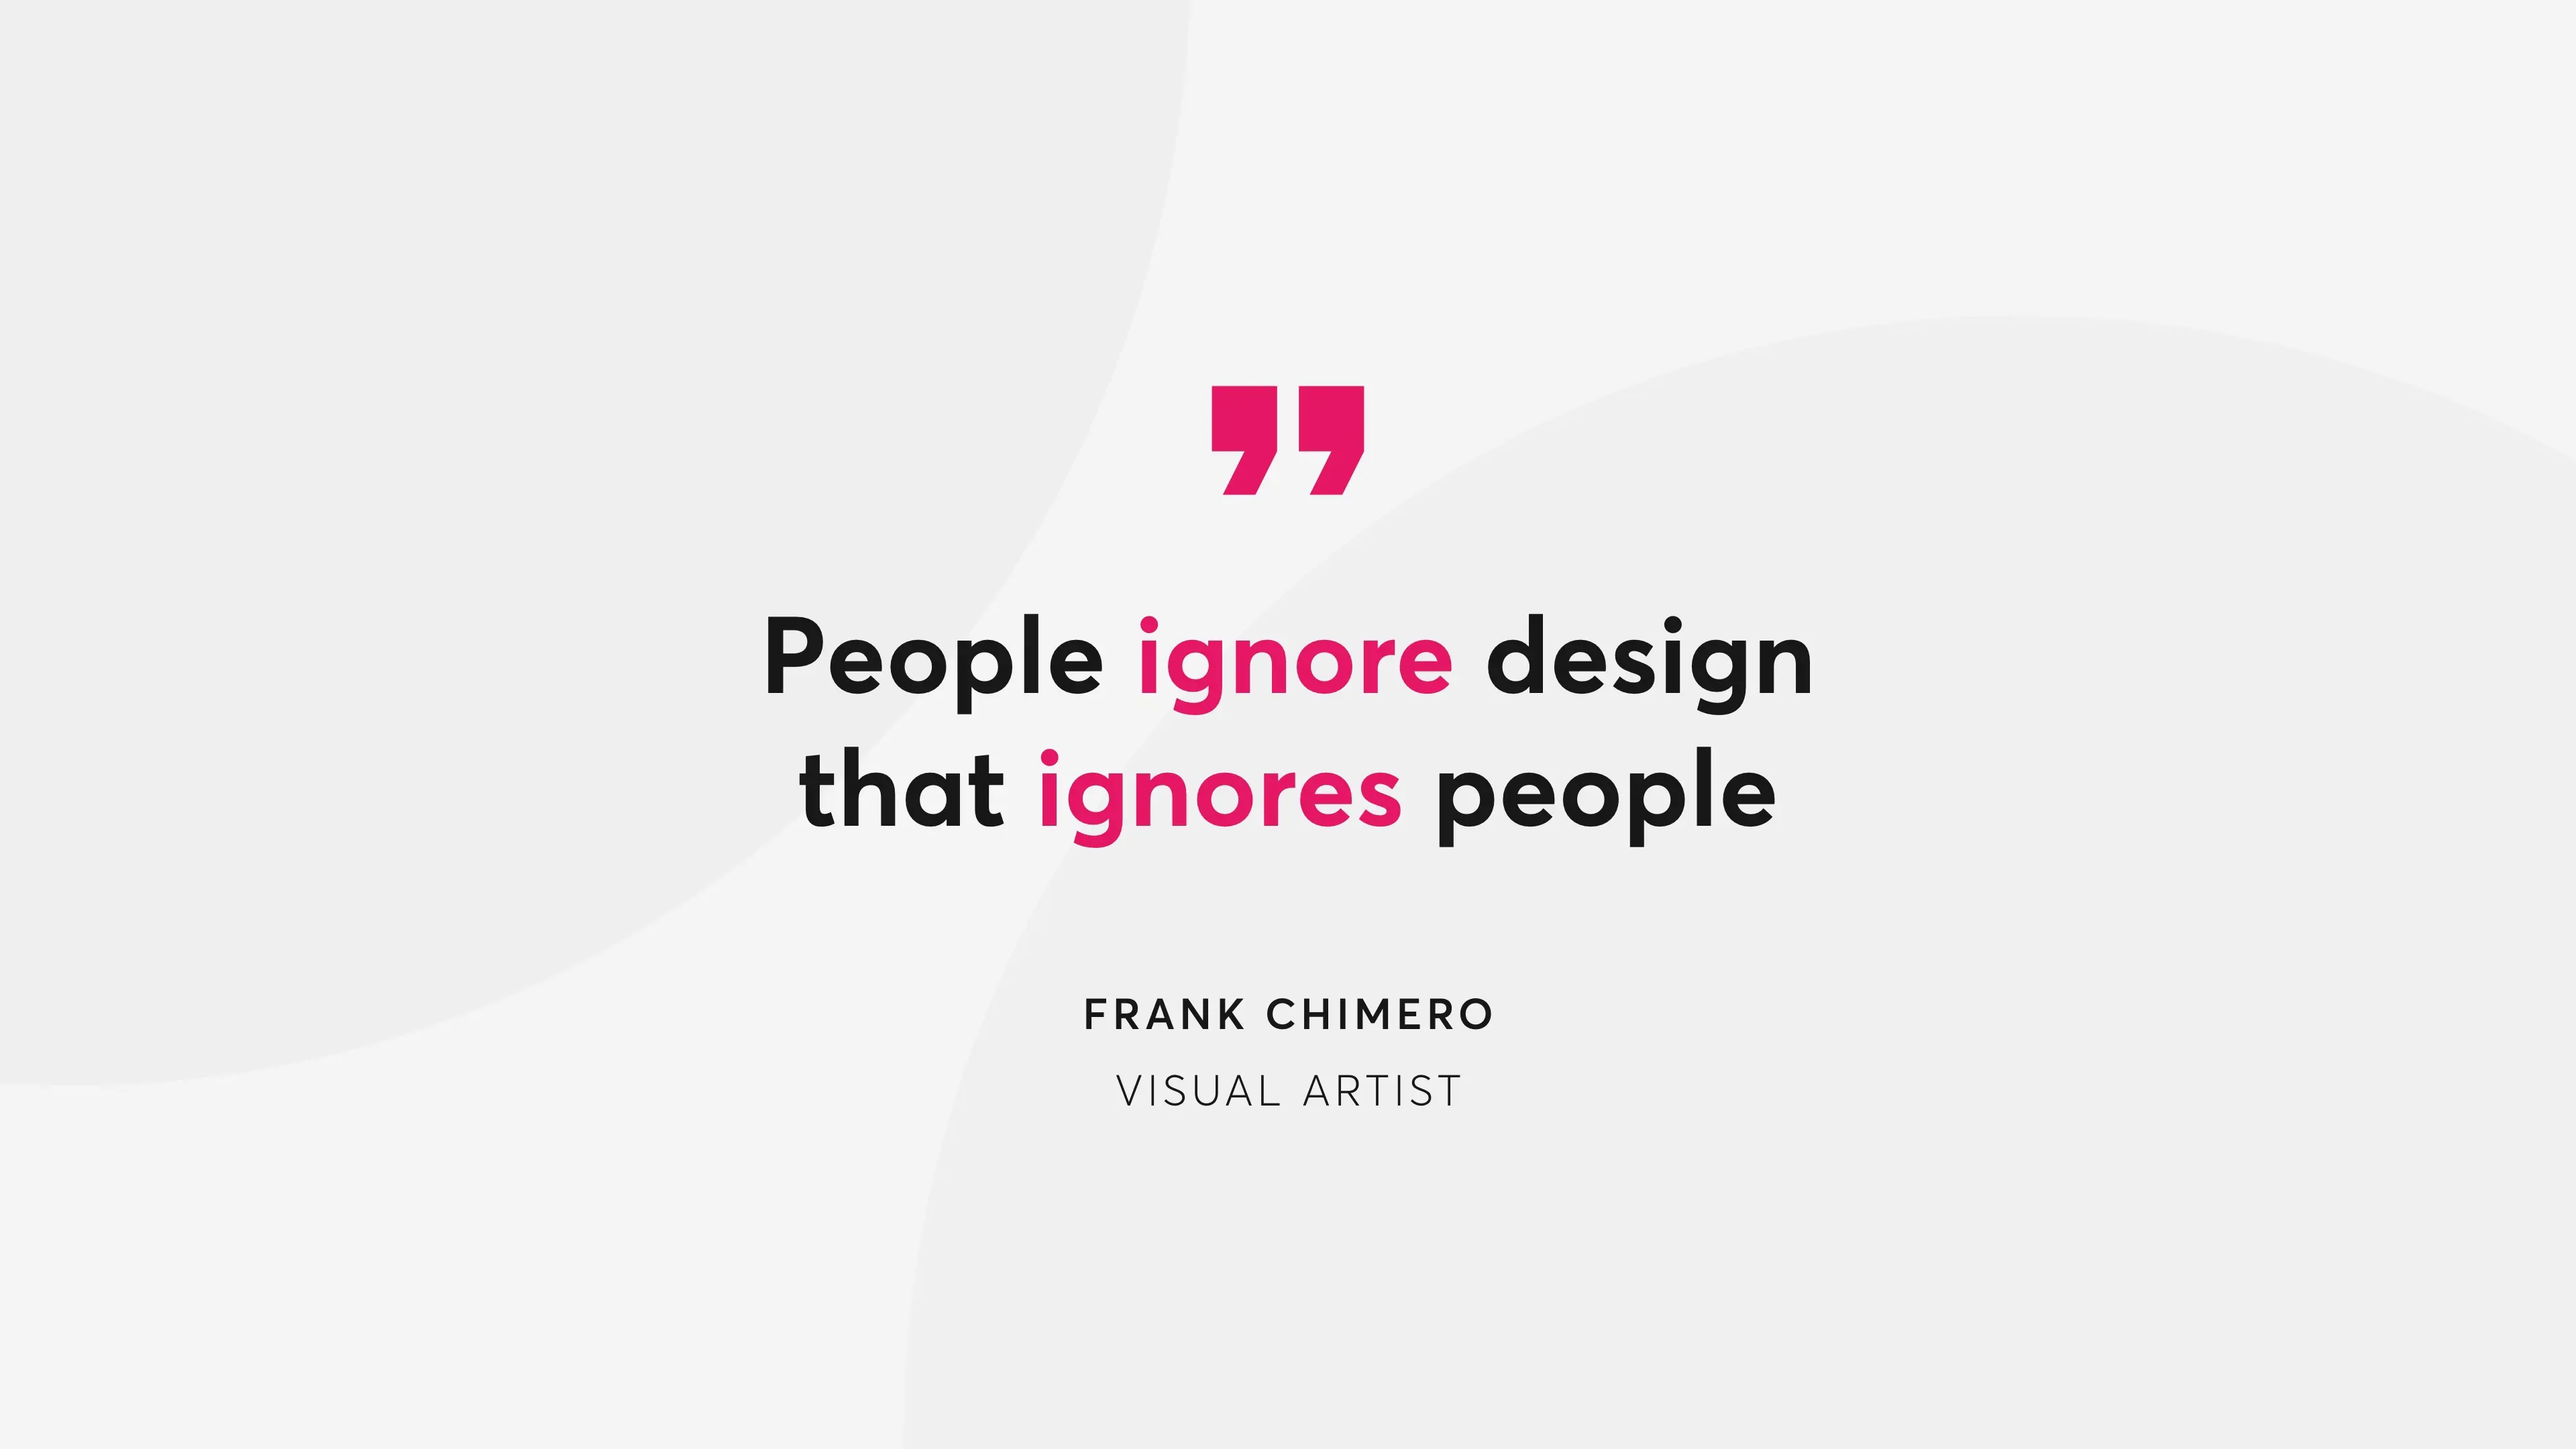 Quote by Frank Chimero saying "People ignore design that ignores people"